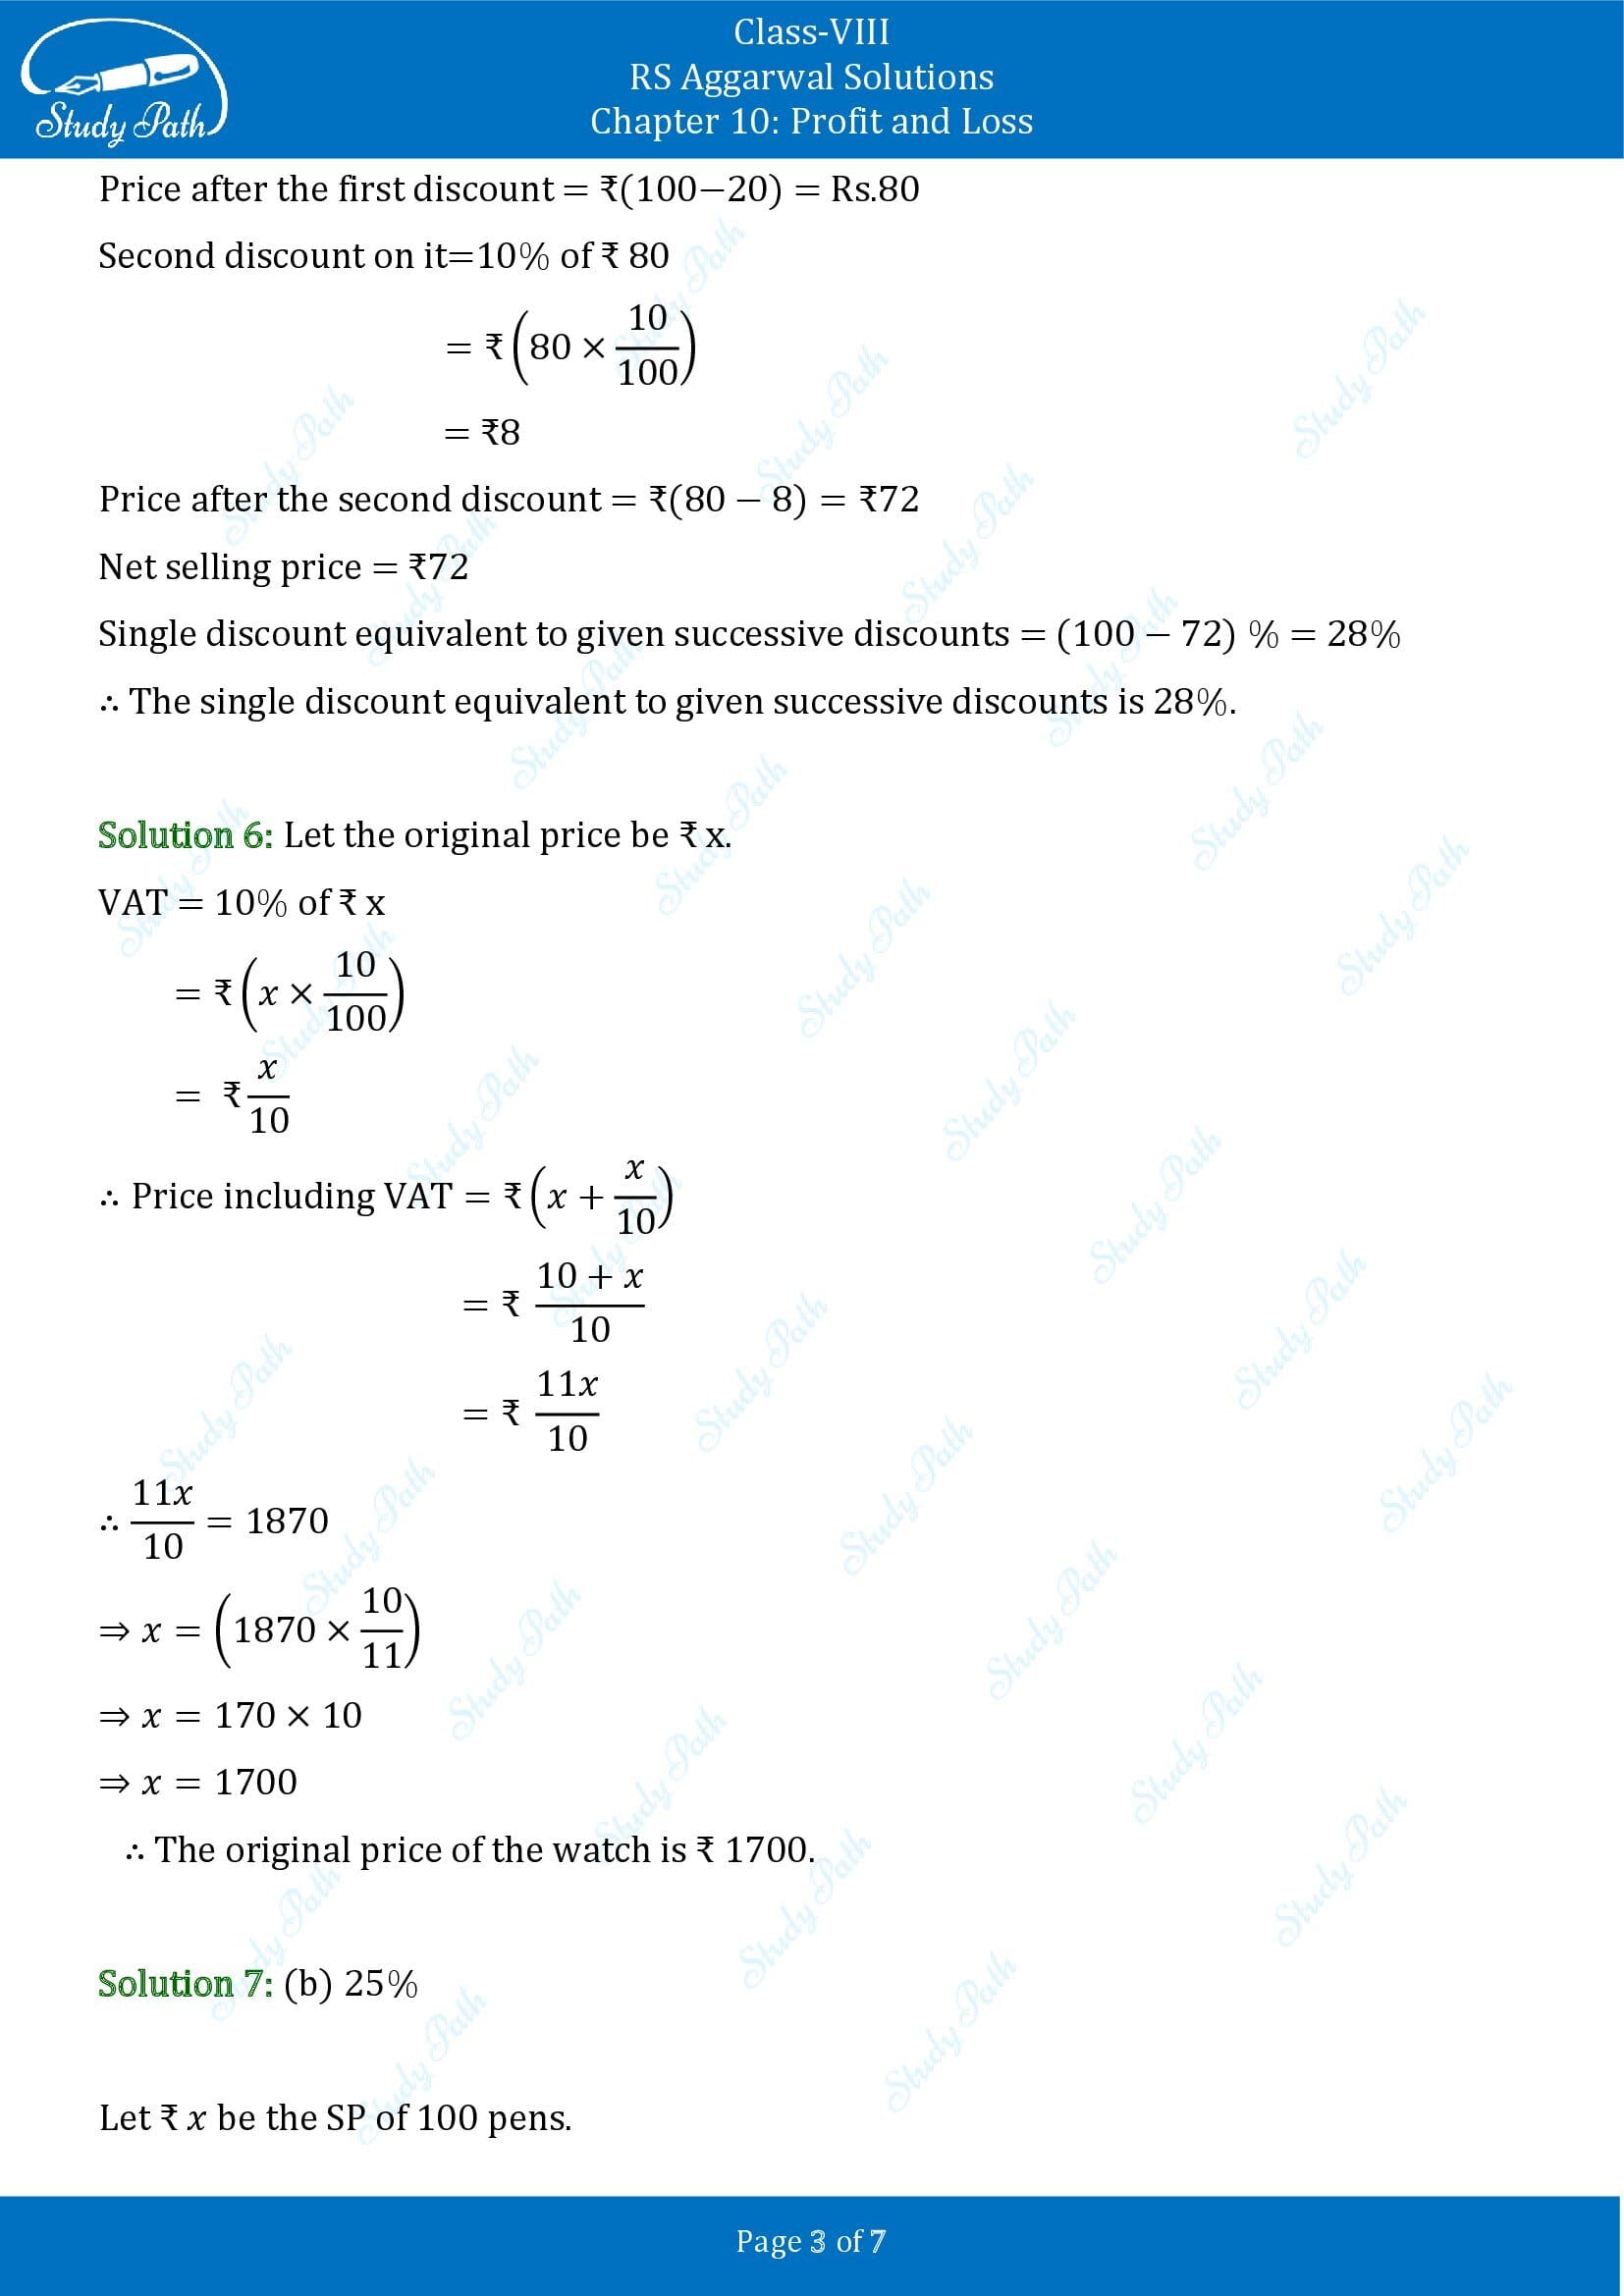 RS Aggarwal Solutions Class 8 Chapter 10 Profit and Loss Test Paper 00003